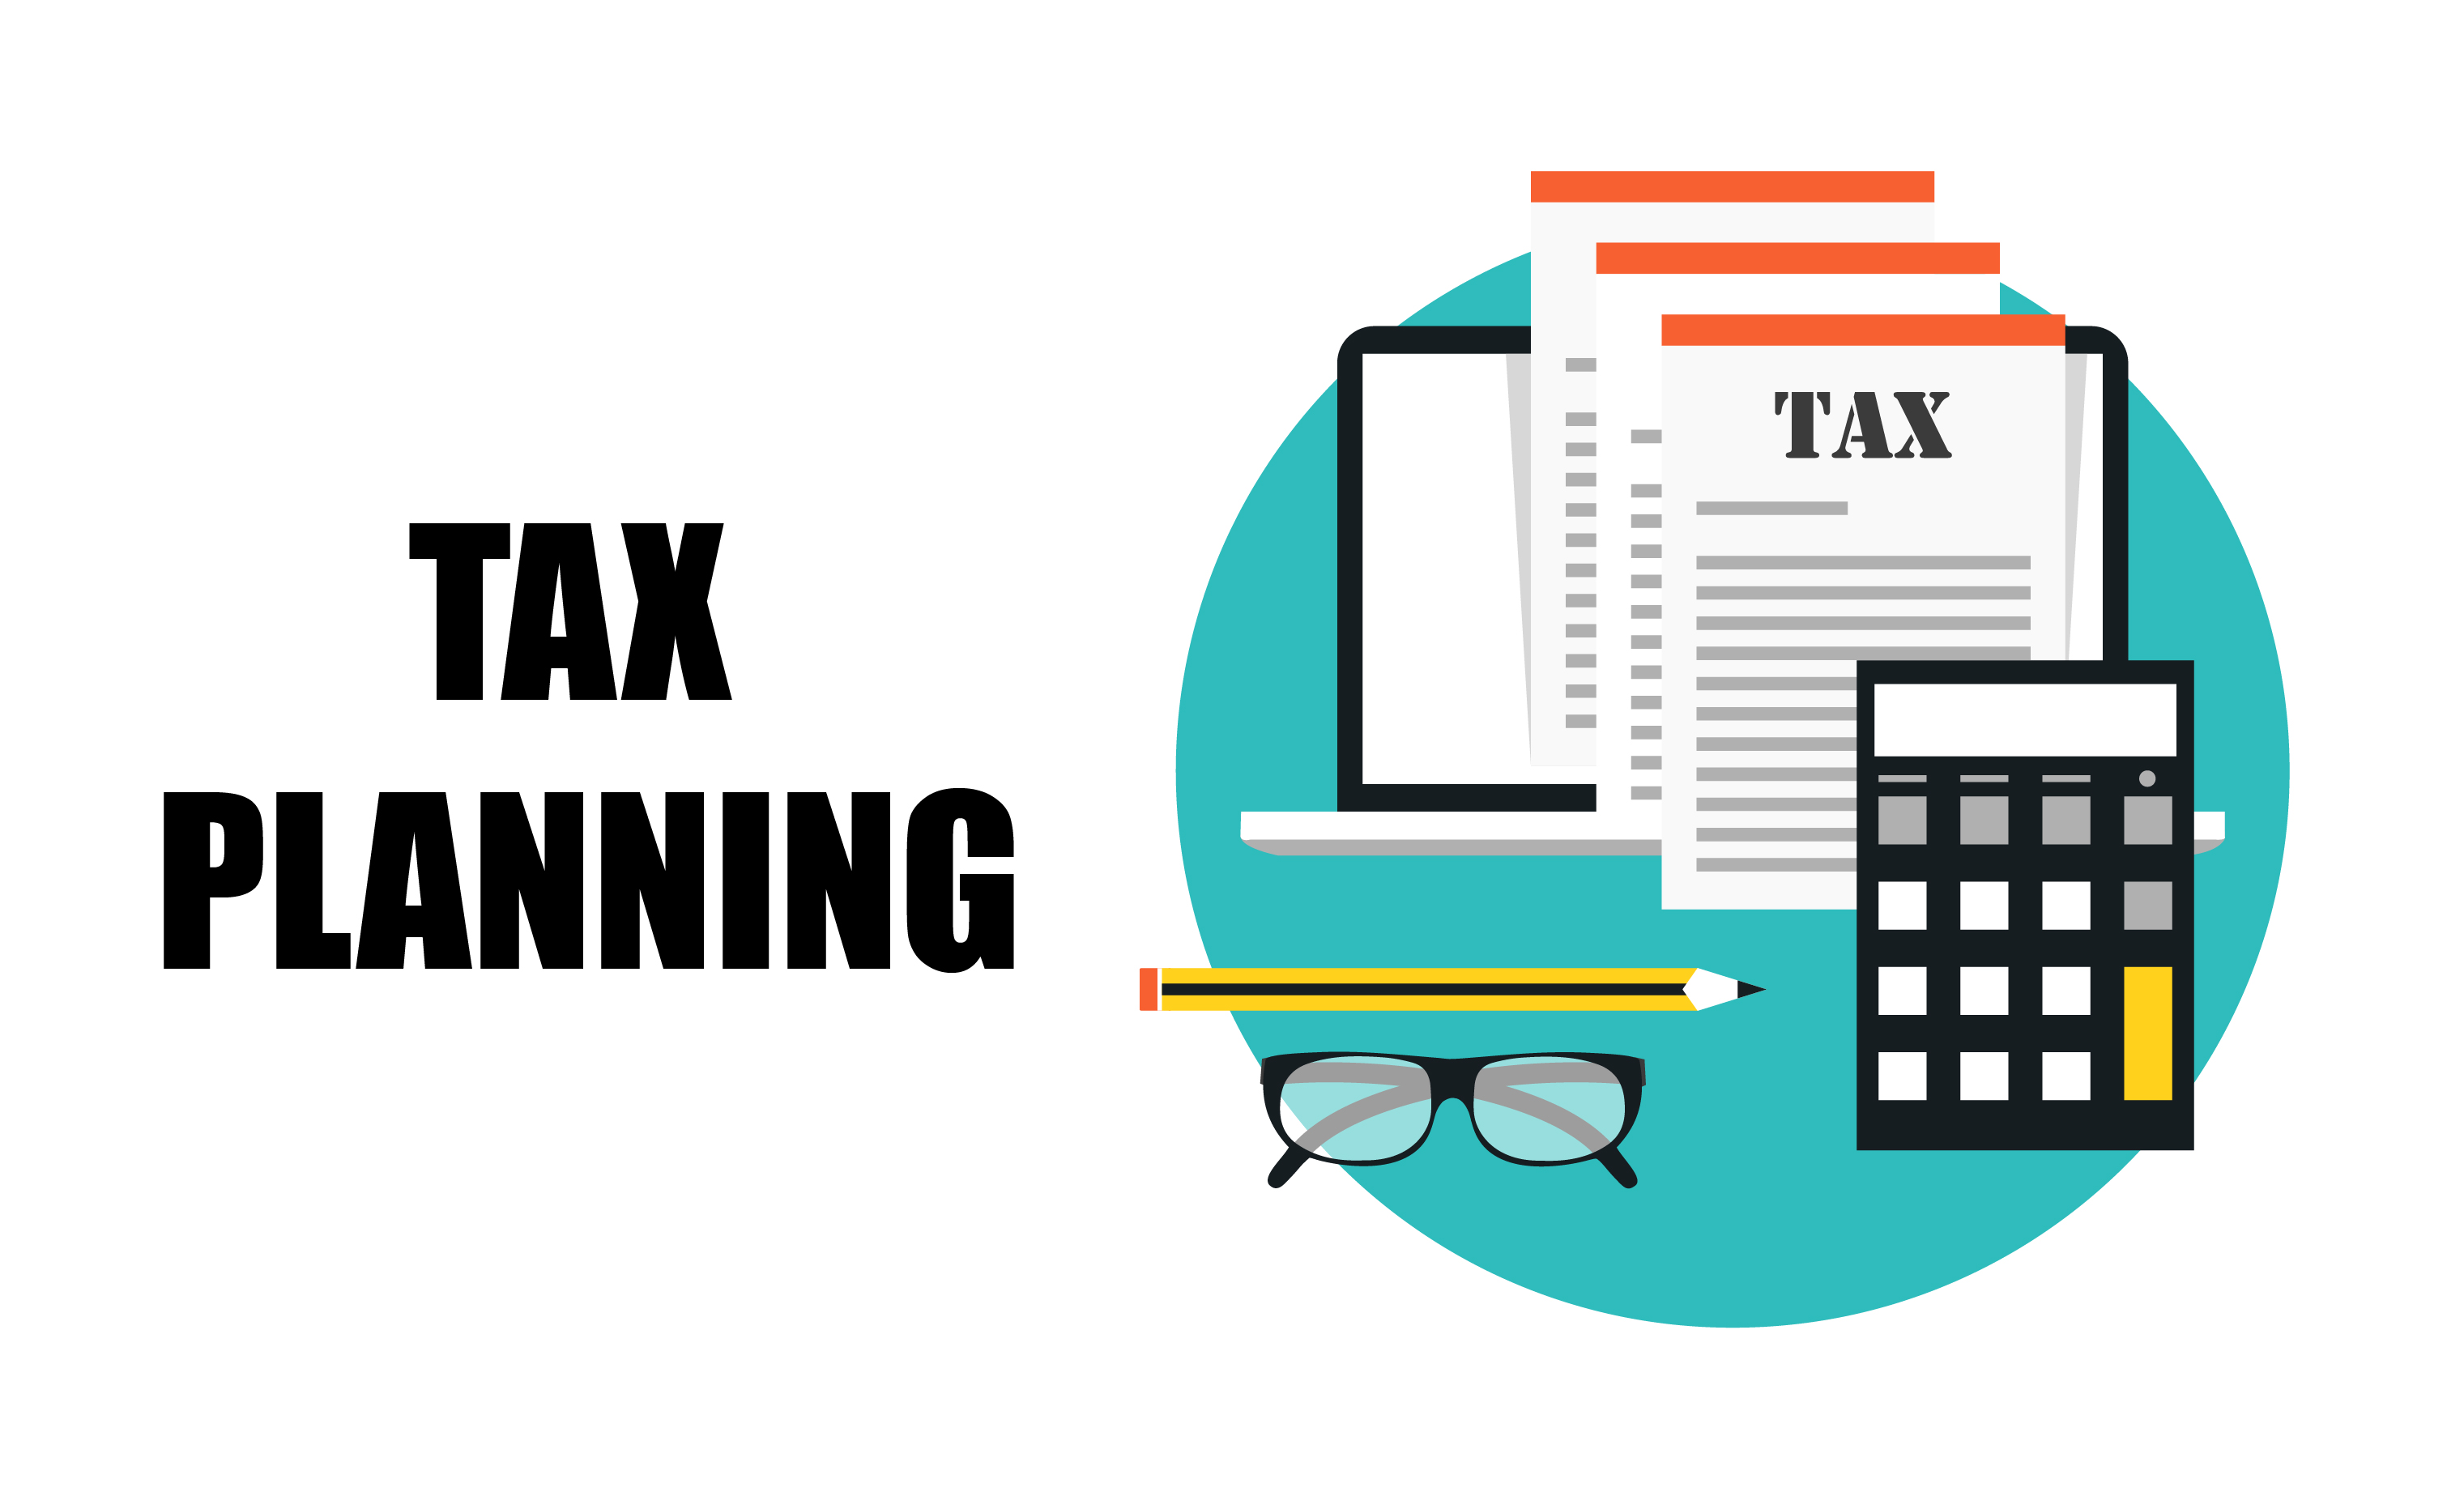 Pre year end tax planning tips before 5 April 2019 - Malone  AccountingMalone Accounting